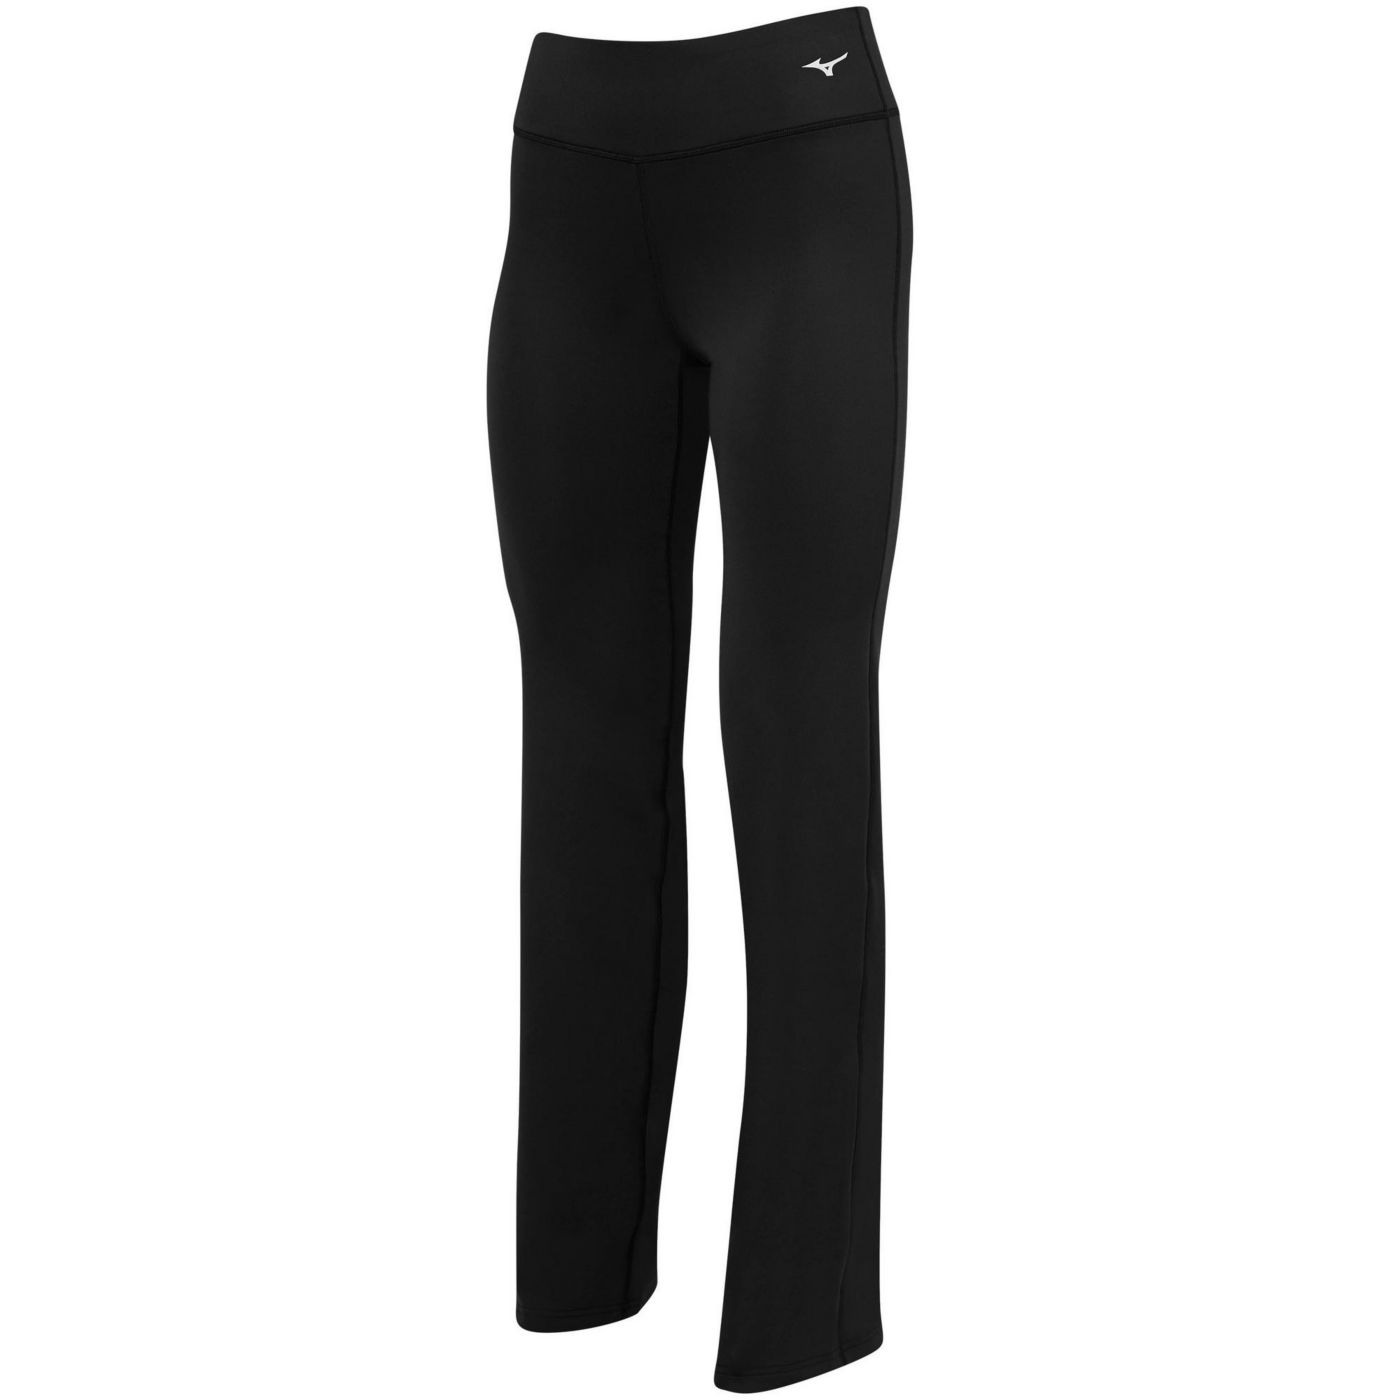 Mizuno Youth Align Volleyball Pants | DICK'S Sporting Goods